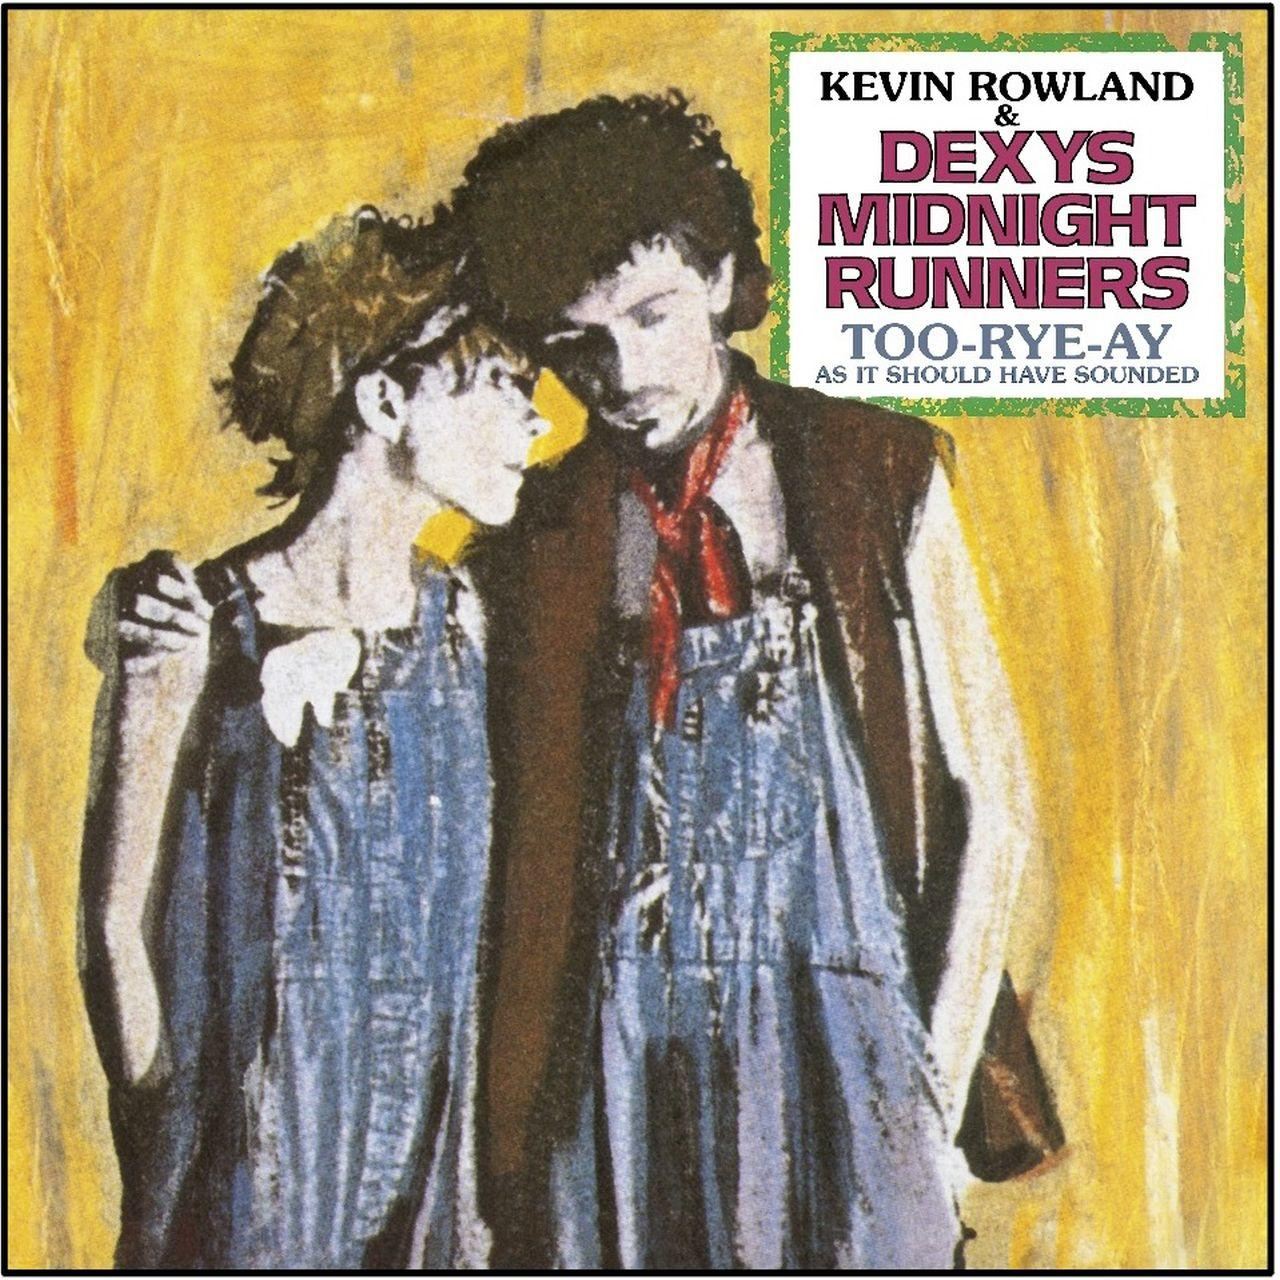 - (Deluxe (CD) As Midnight (40th It Have - Runners Rowland Too-Rye-Ay, & Sounded Anniversary Should Edition) Dexy\'s Remix) Kevin